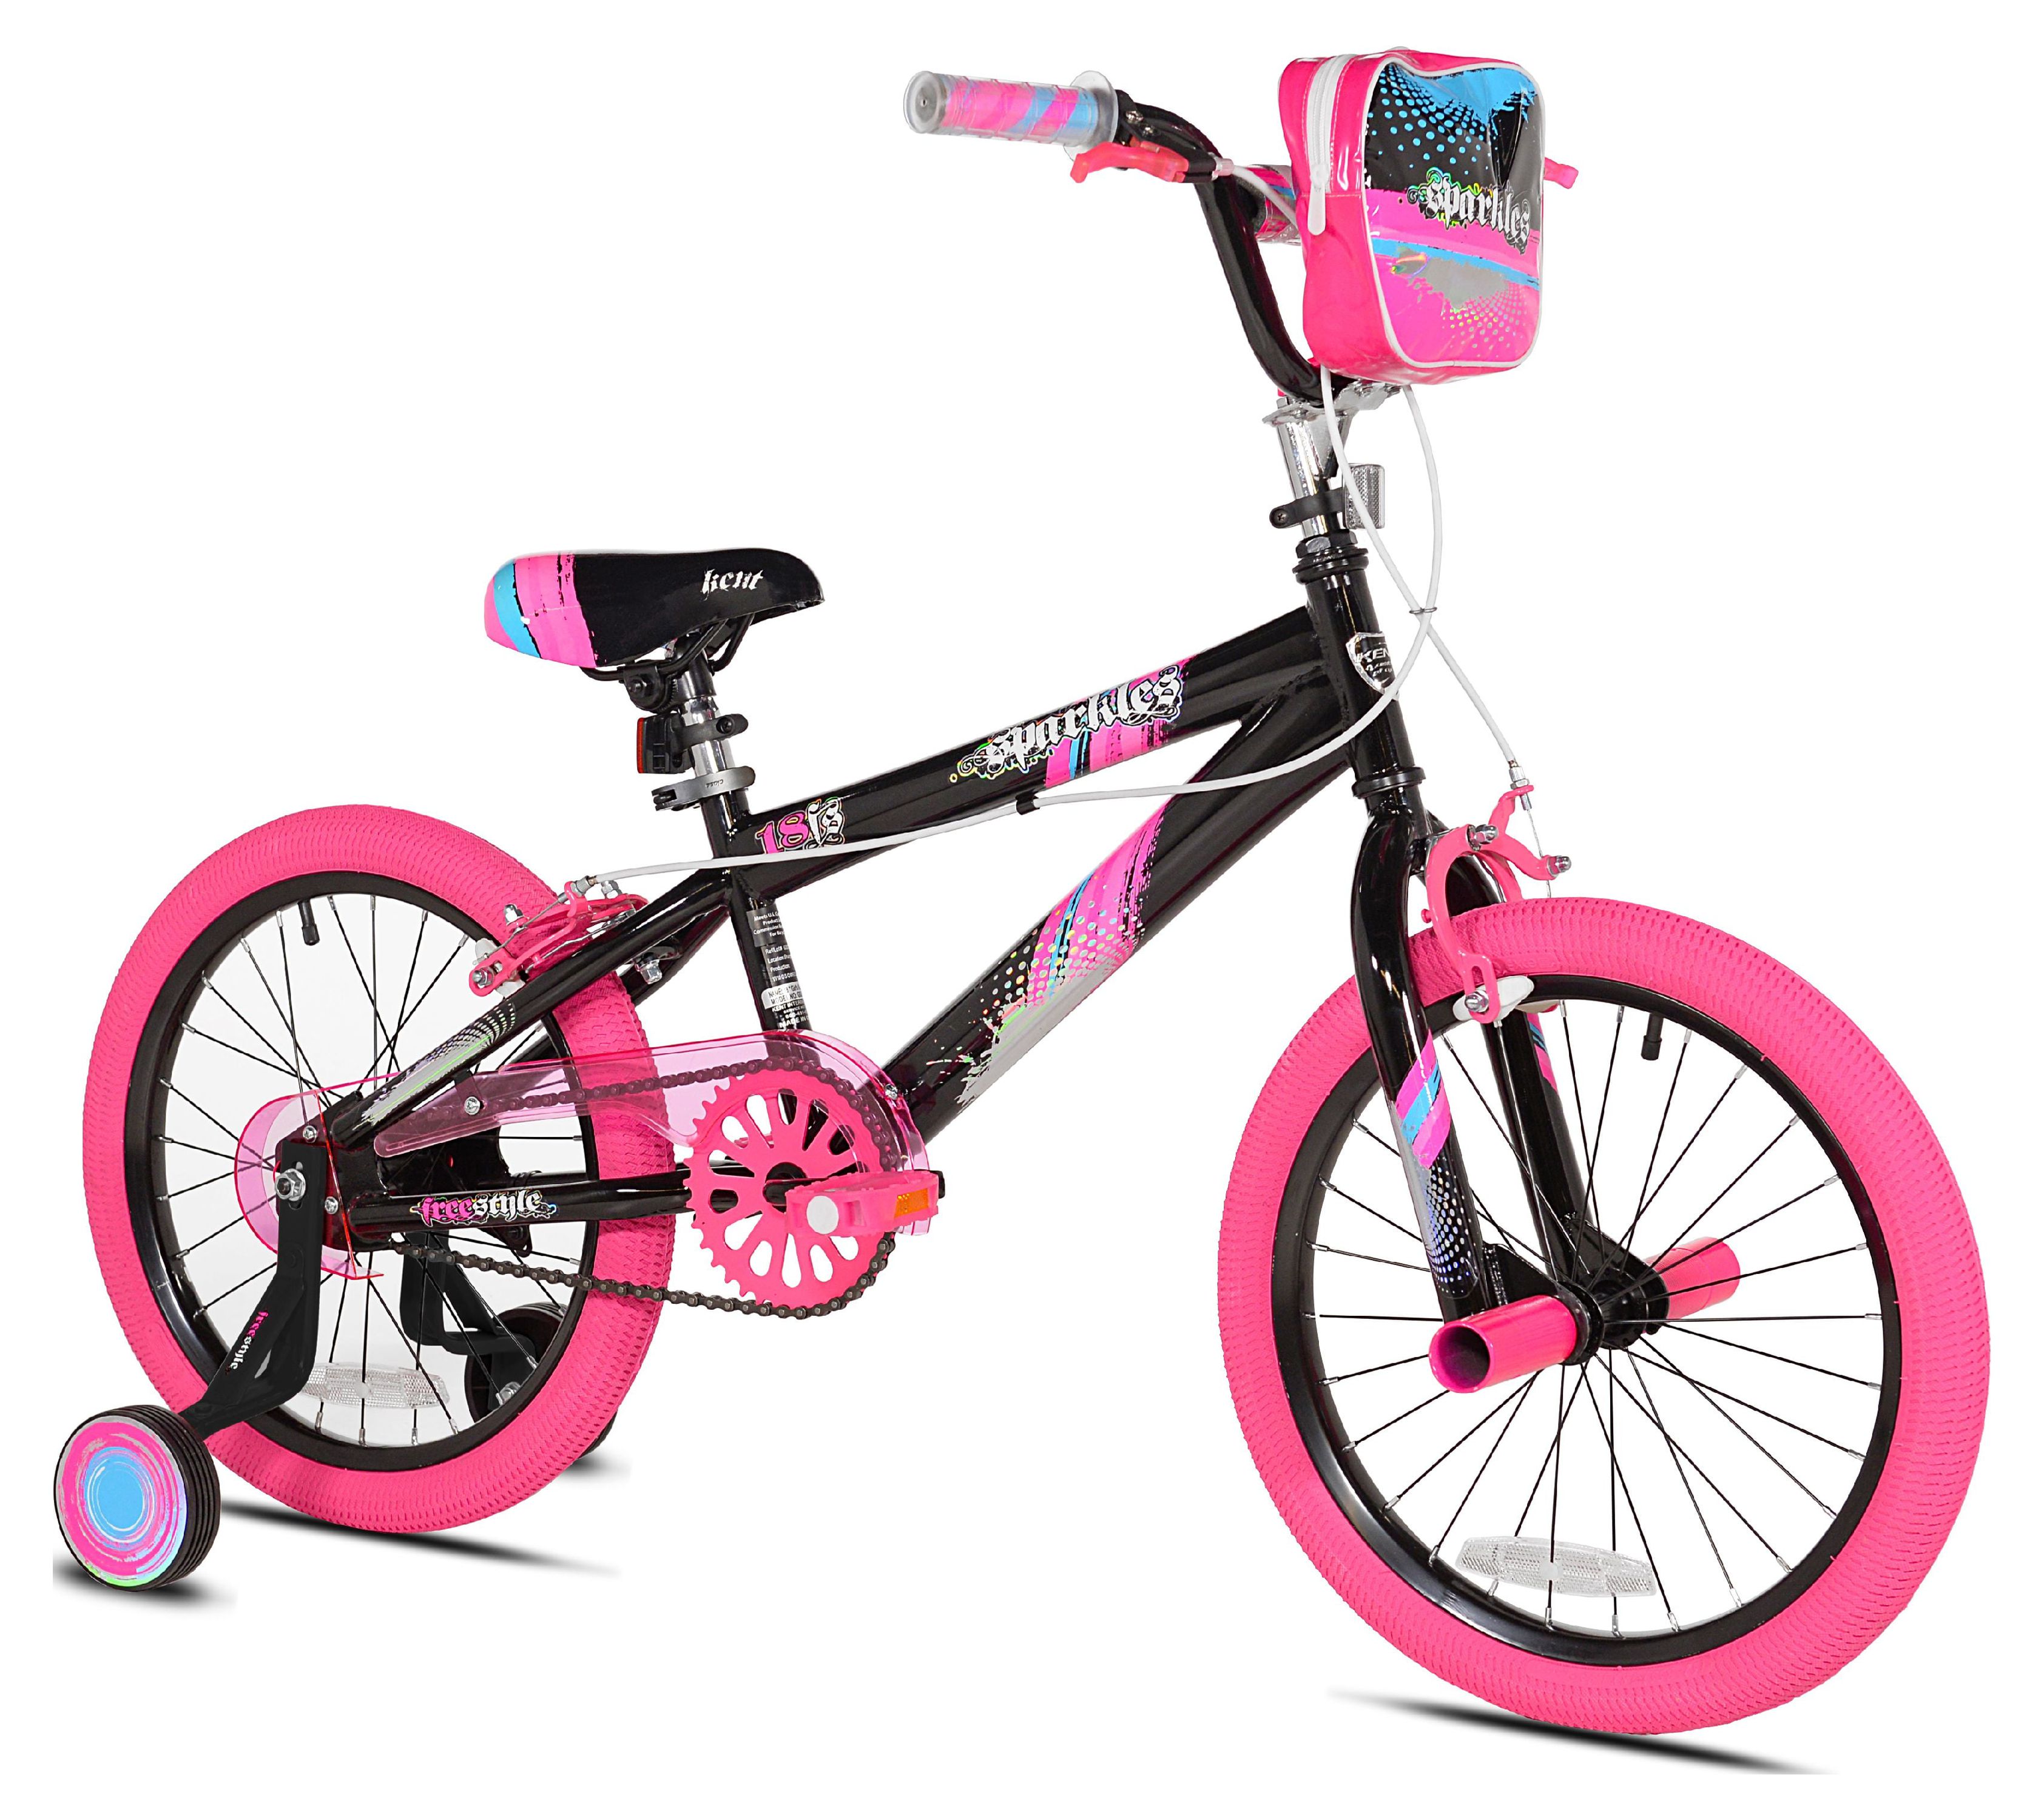 Kent Bicycles 18 inch Girl's Sparkles Bicycle, Black and Pink - image 1 of 10